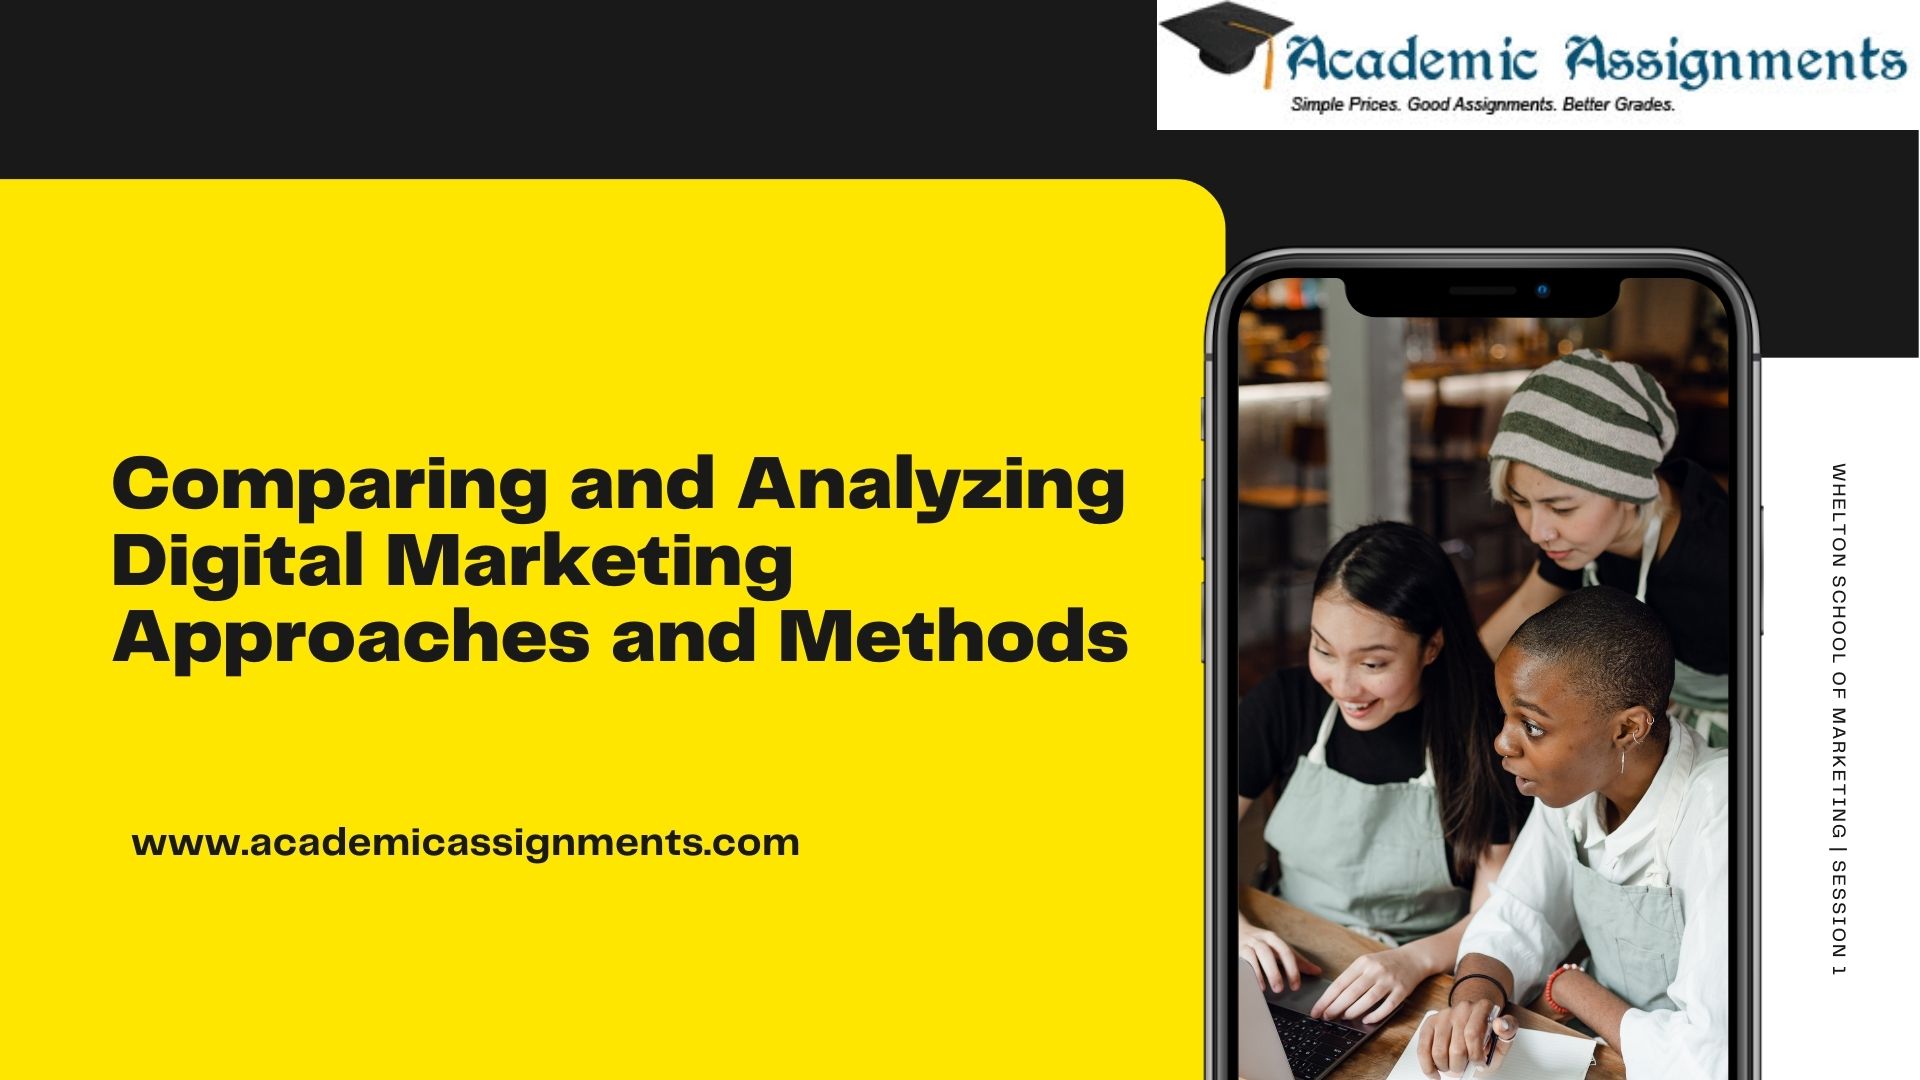 Comparing and Analyzing Digital Marketing Approaches and Methods